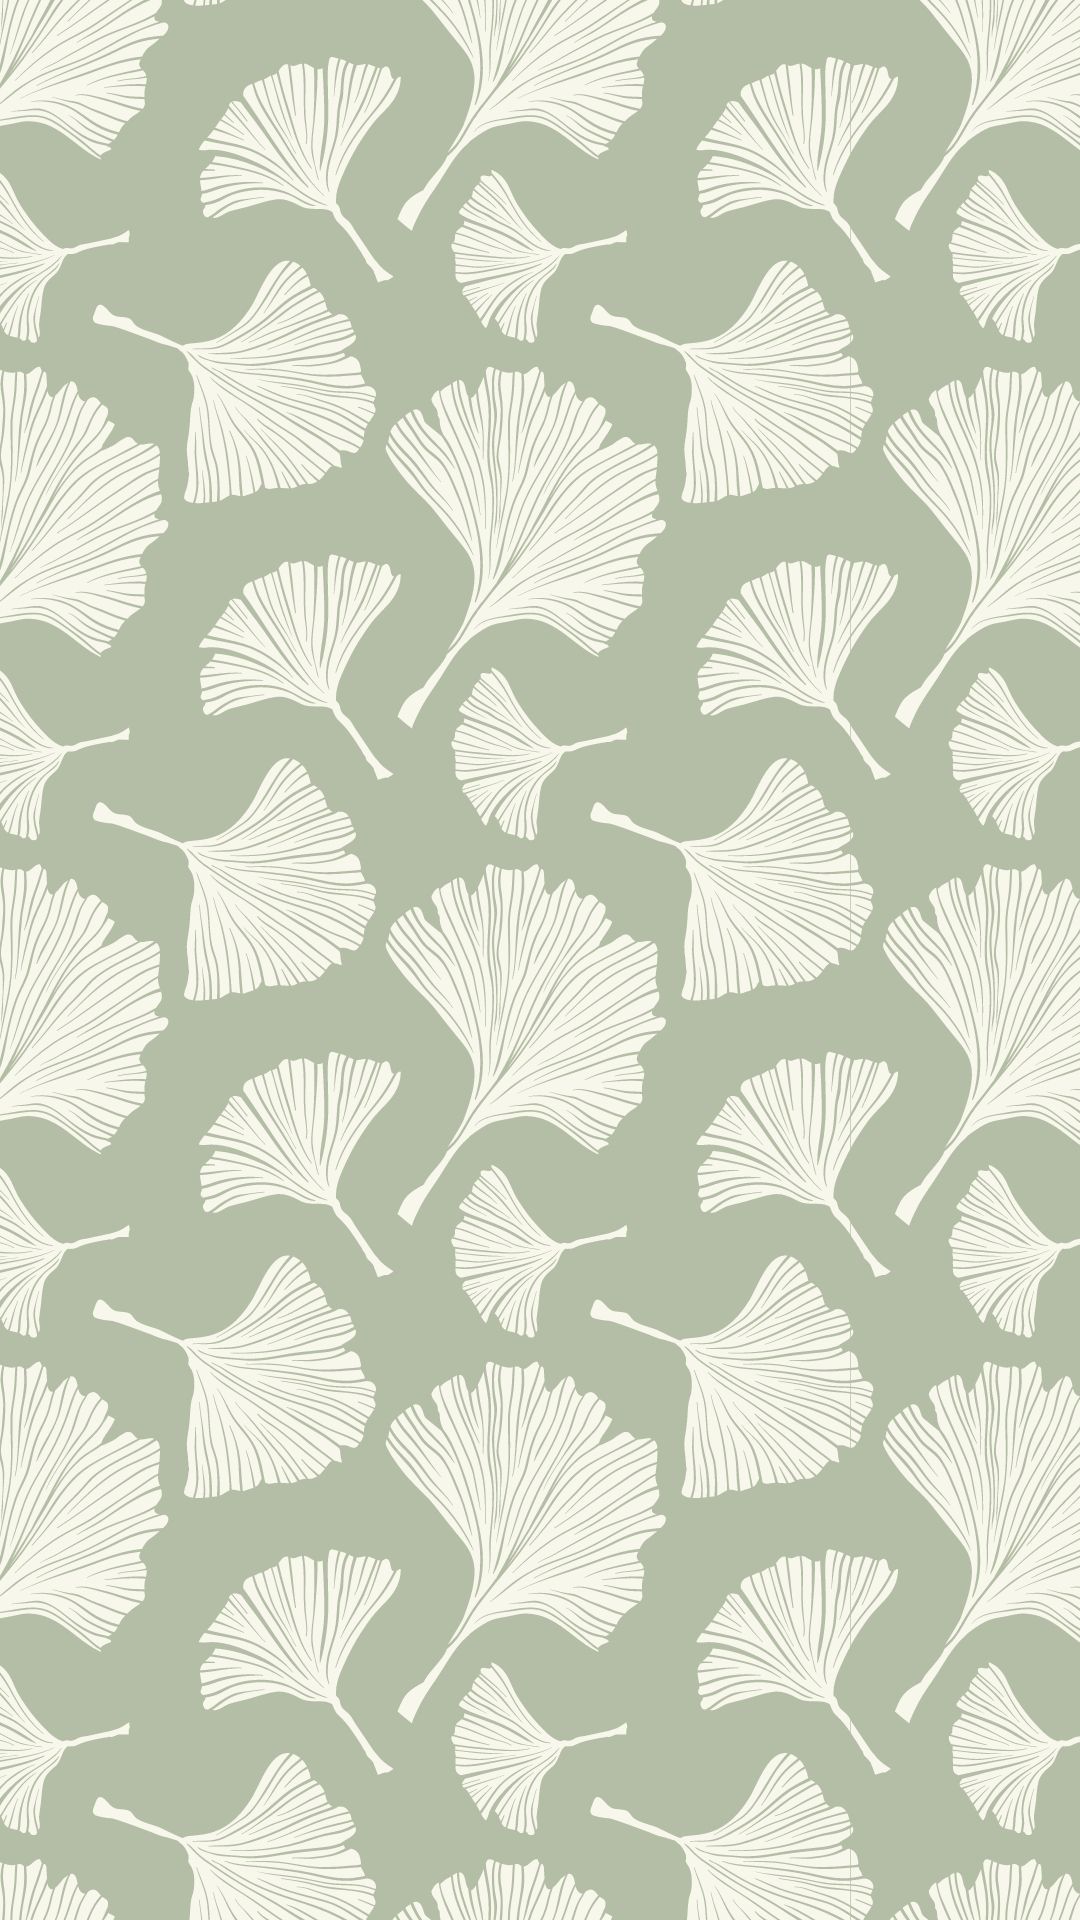 A light sage green wallpaper with white ginkgo leaves - Soft green, sage green, lime green